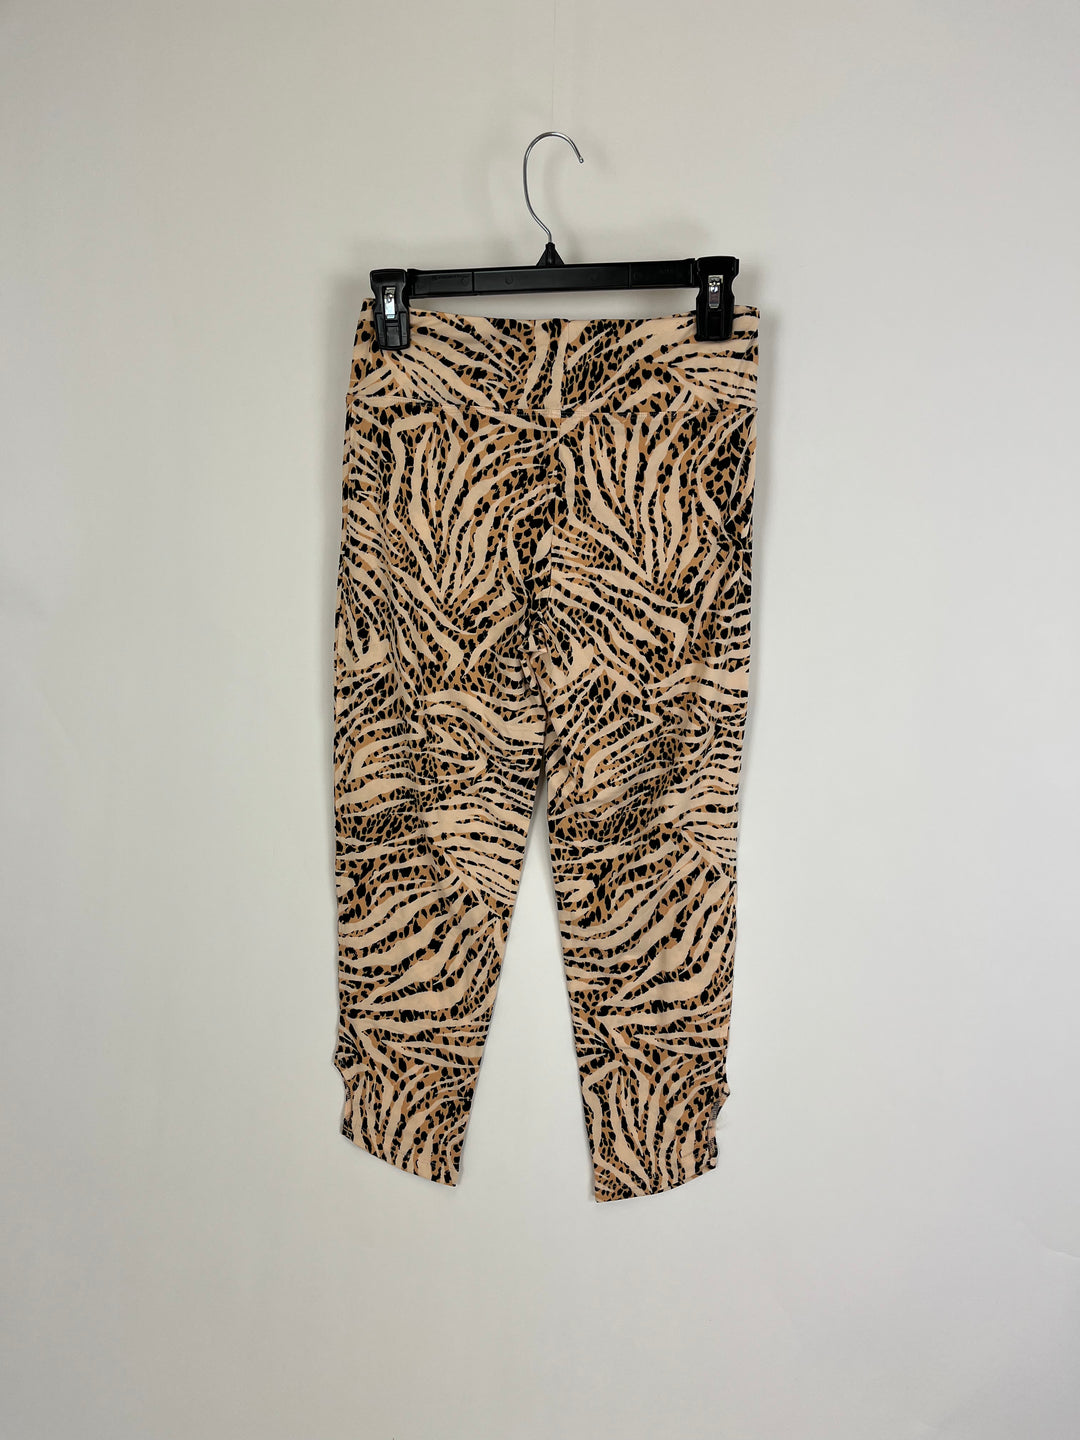 Leopard Print Leggings - Size 4/6 and 6/8